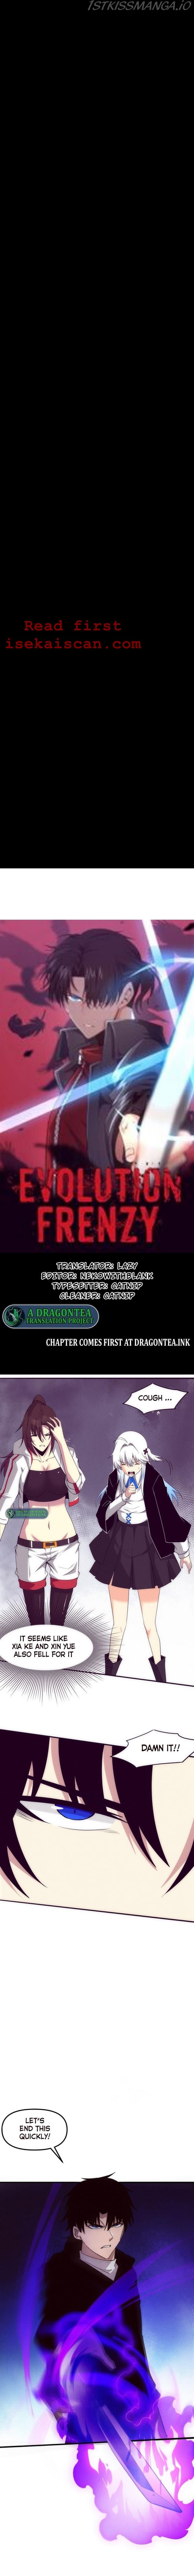 Evolution Frenzy - Page 1